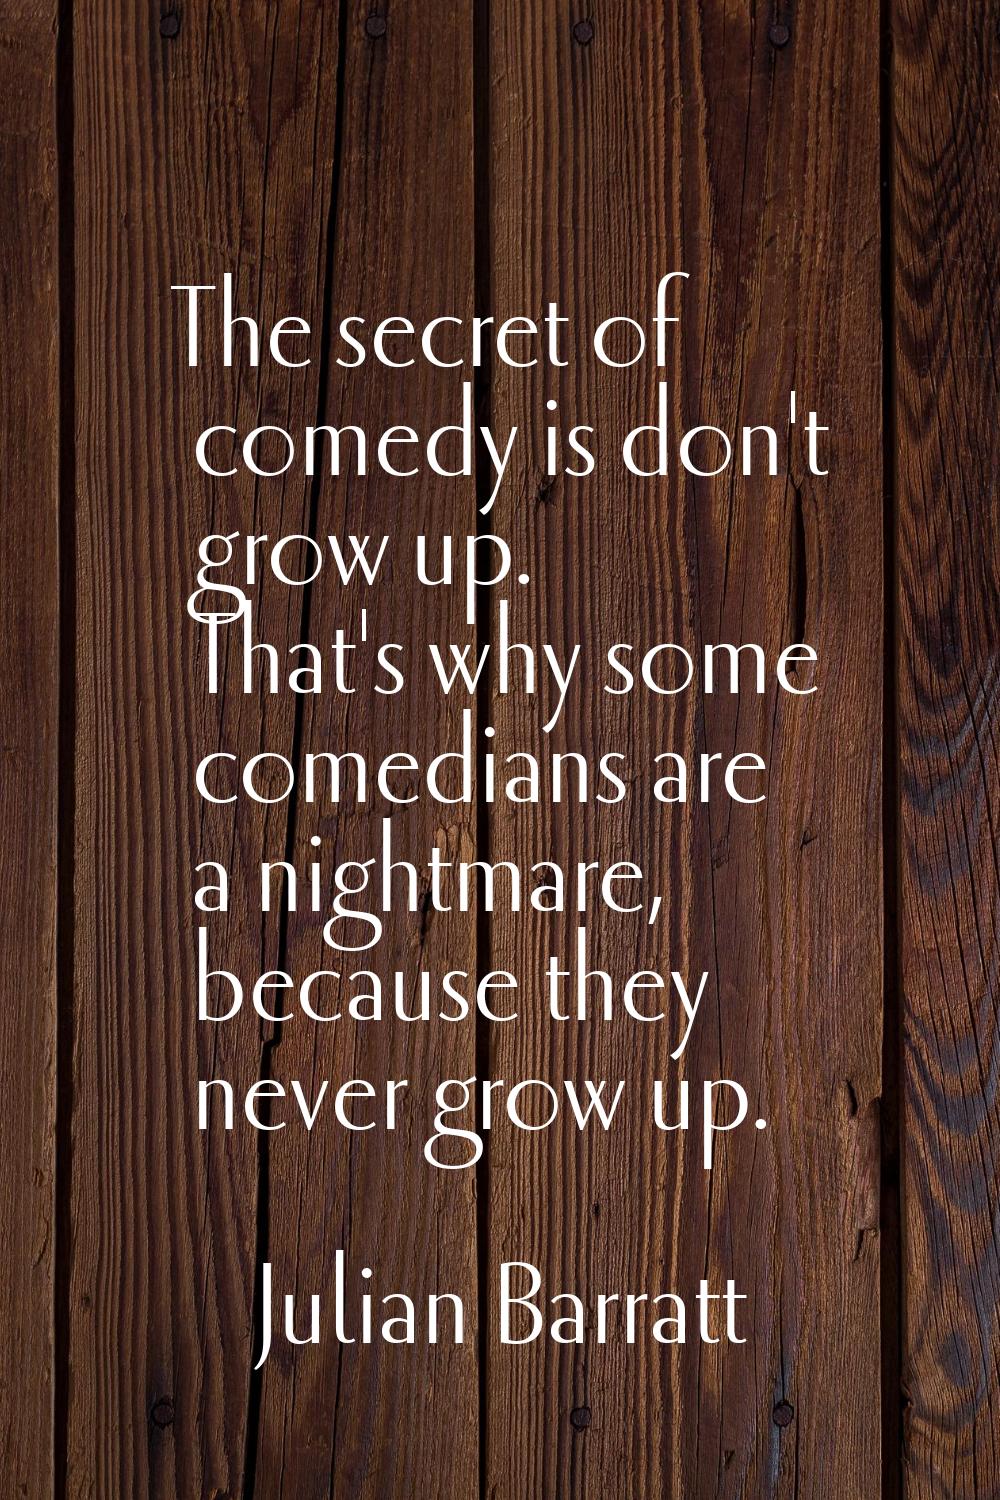 The secret of comedy is don't grow up. That's why some comedians are a nightmare, because they neve